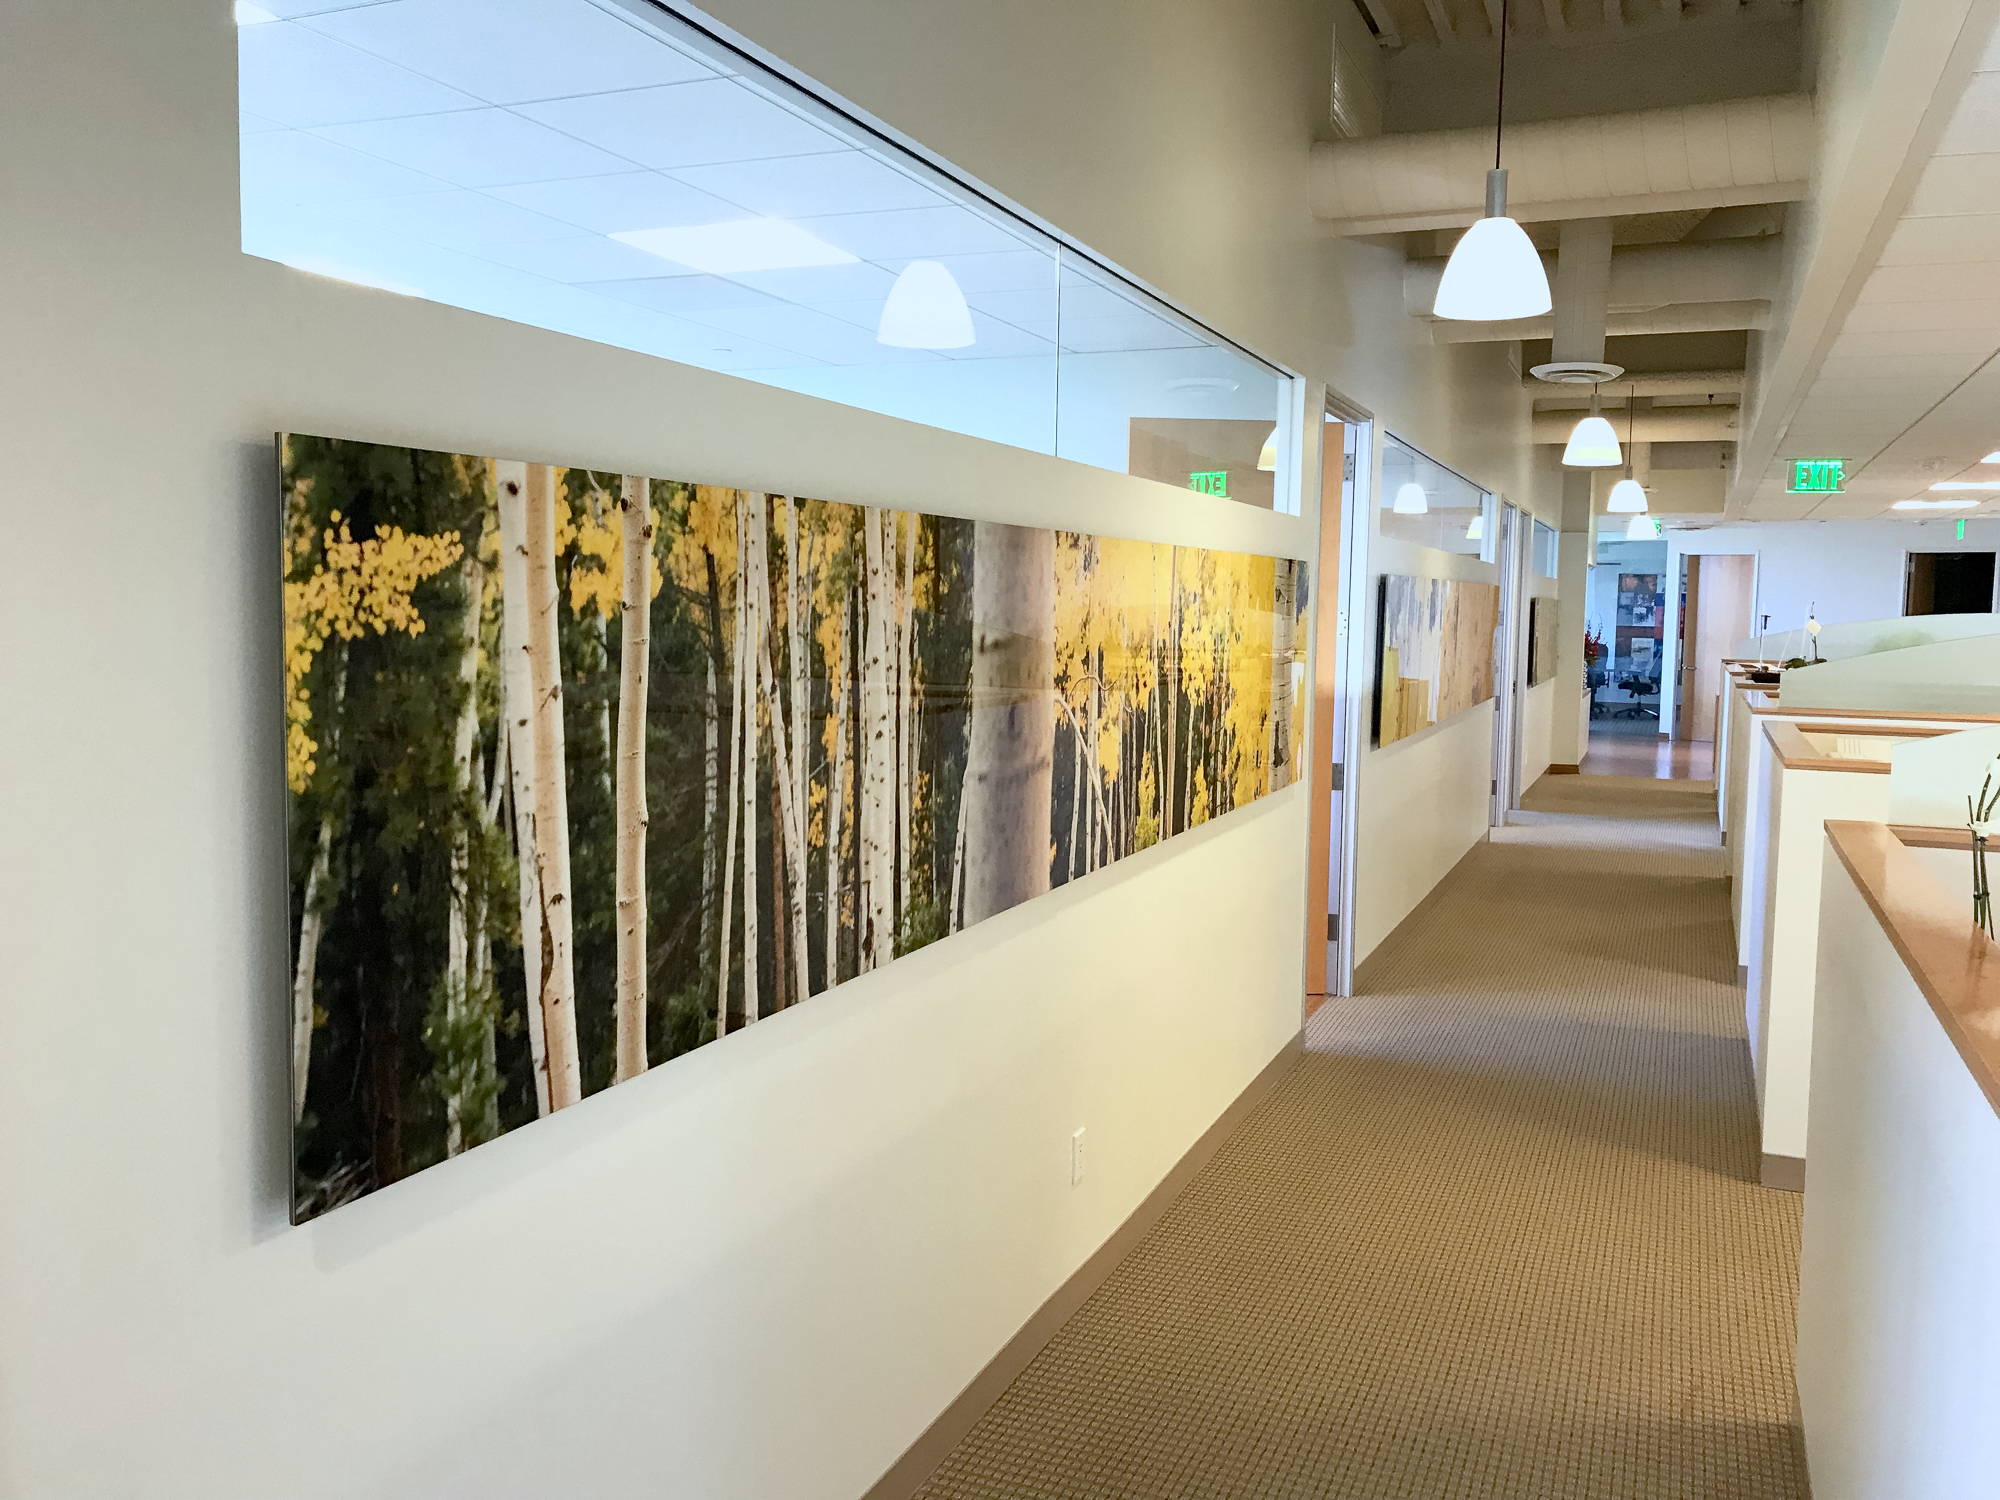 Large format gigapixel photograph in an office hallway, which is one of the largest business art installations ever